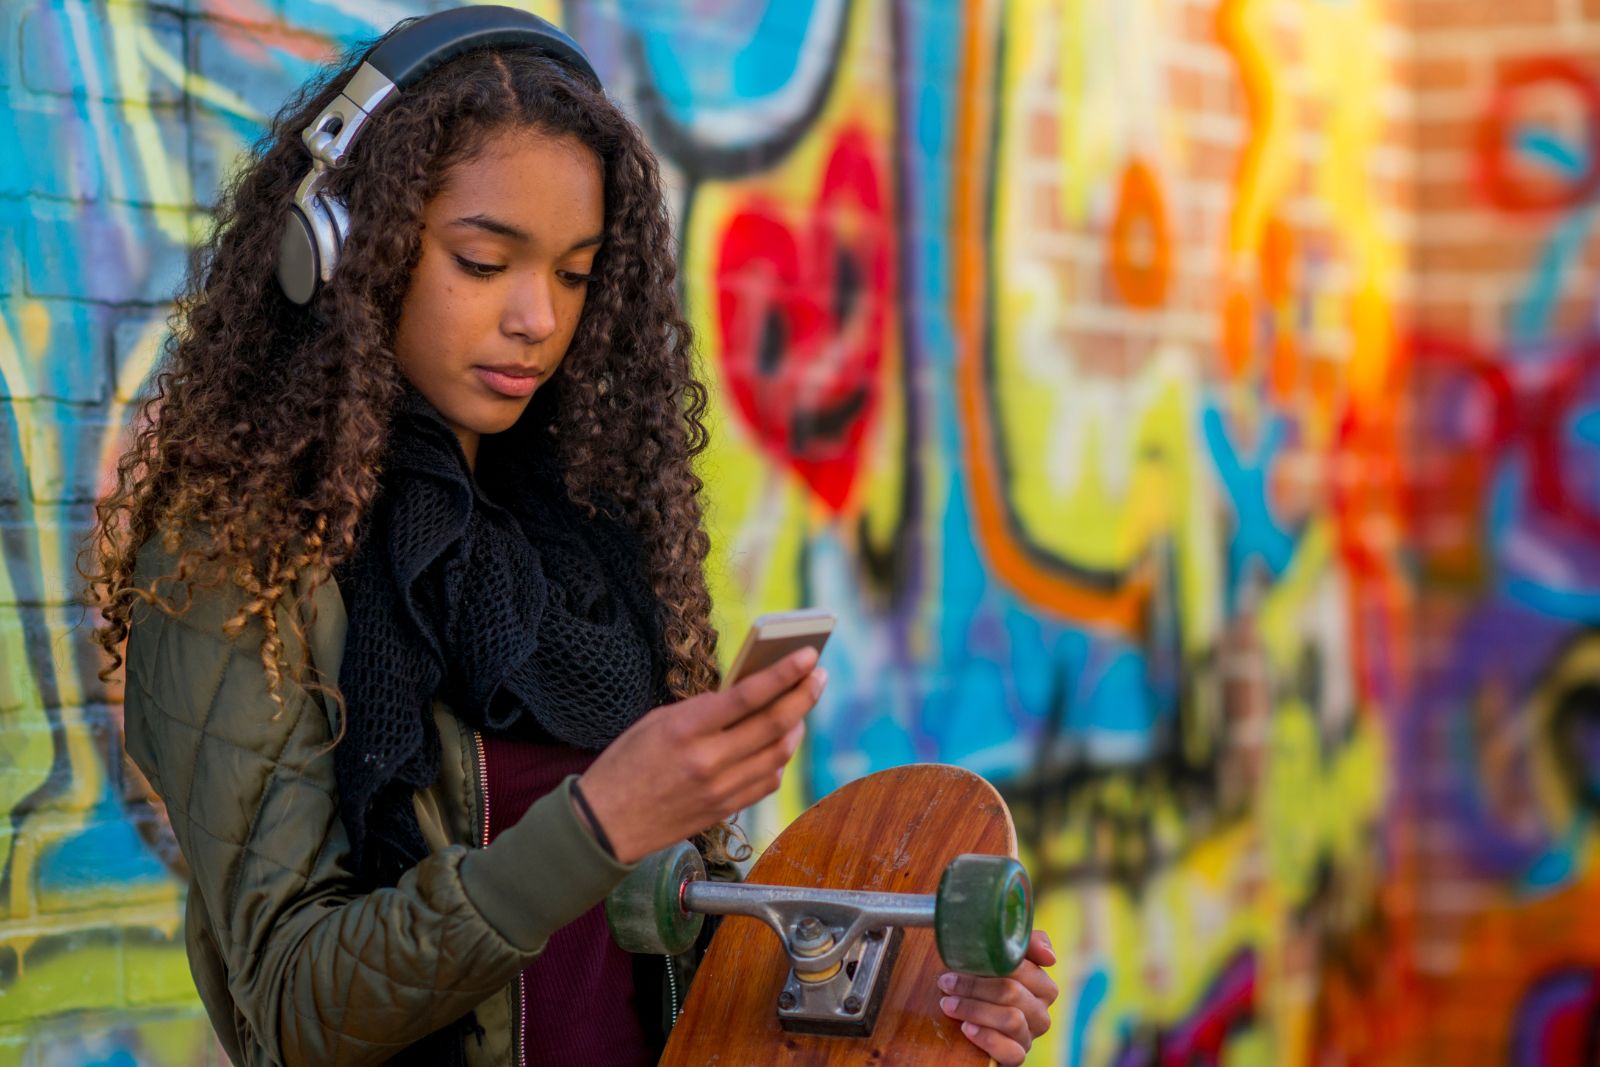 Teenager with skateboard listening to streamed audio on headphones